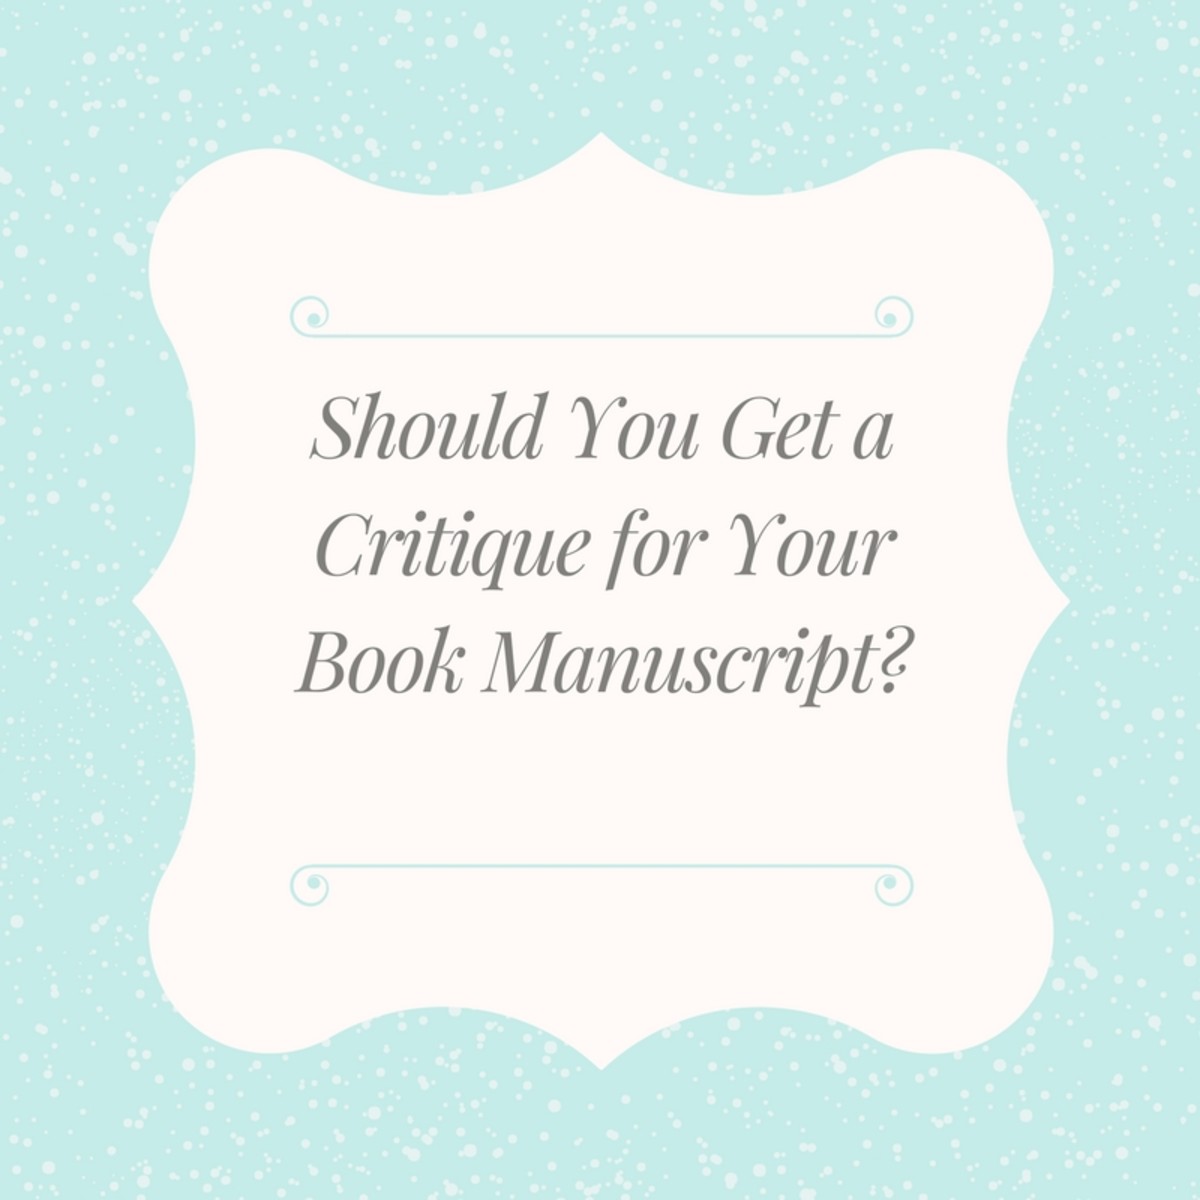 A critique can help get your book ready for more detailed editing.